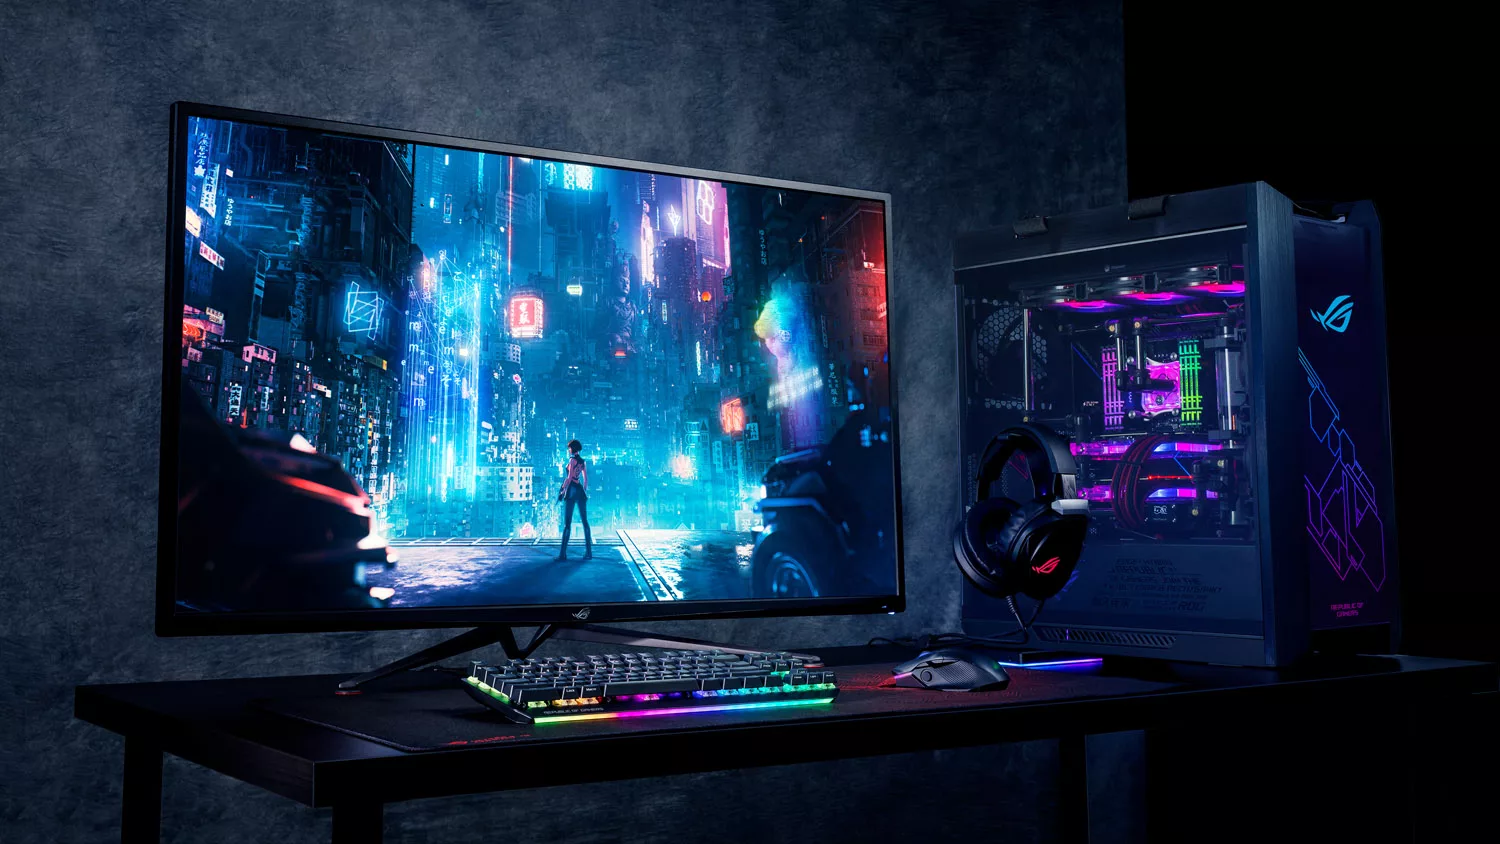 A photo of a gaming setup, with a desktop PC, gaming headset, mouse and keyboard, and large monitor on a desk.